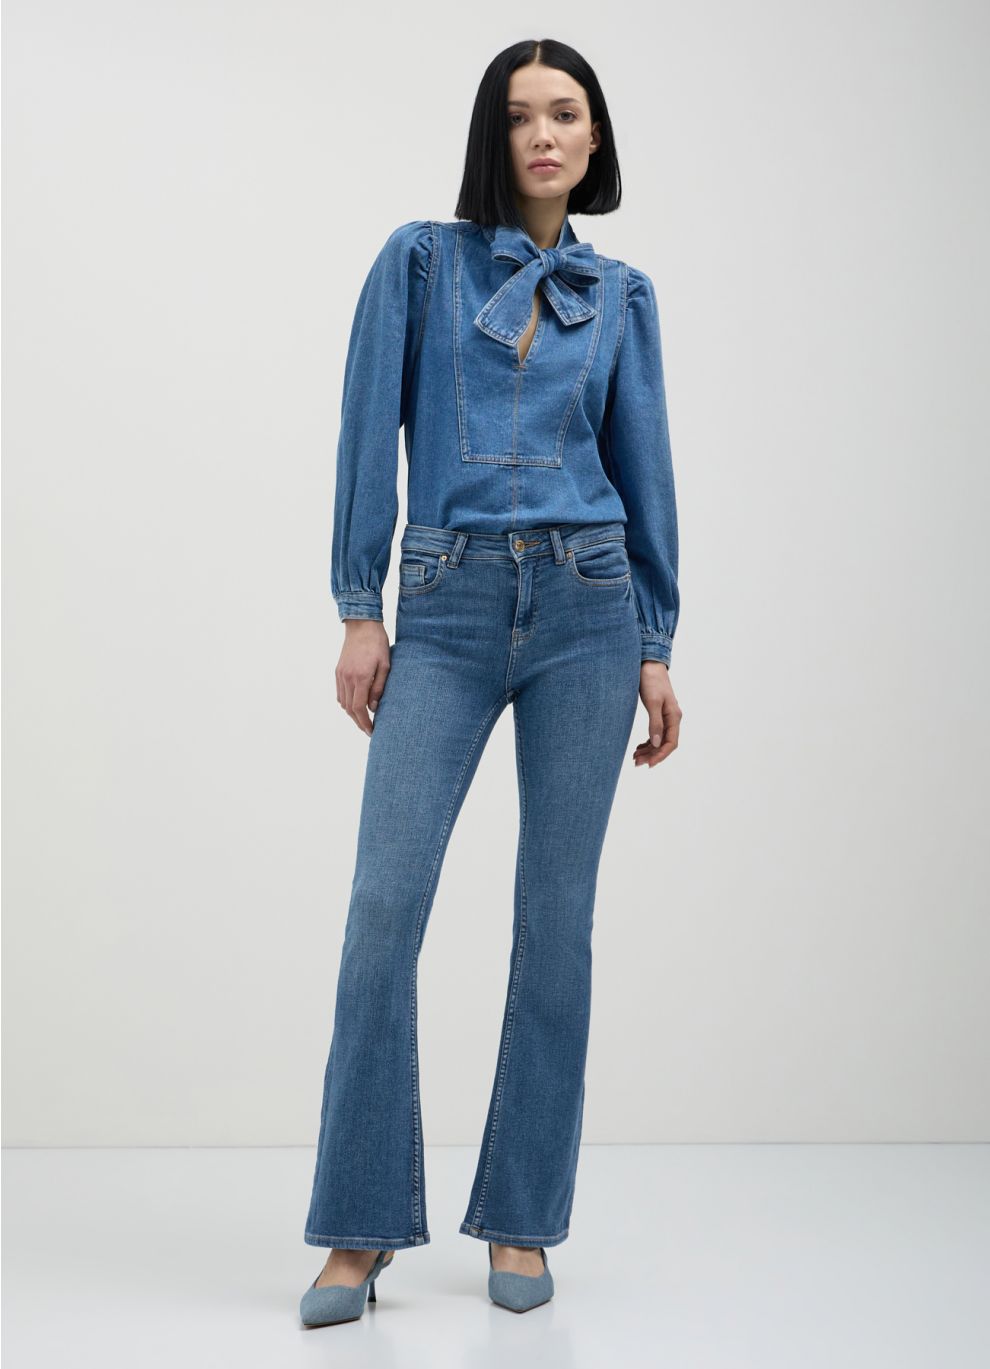 Calliope > Jeans - Flare and Trumpet Femme online